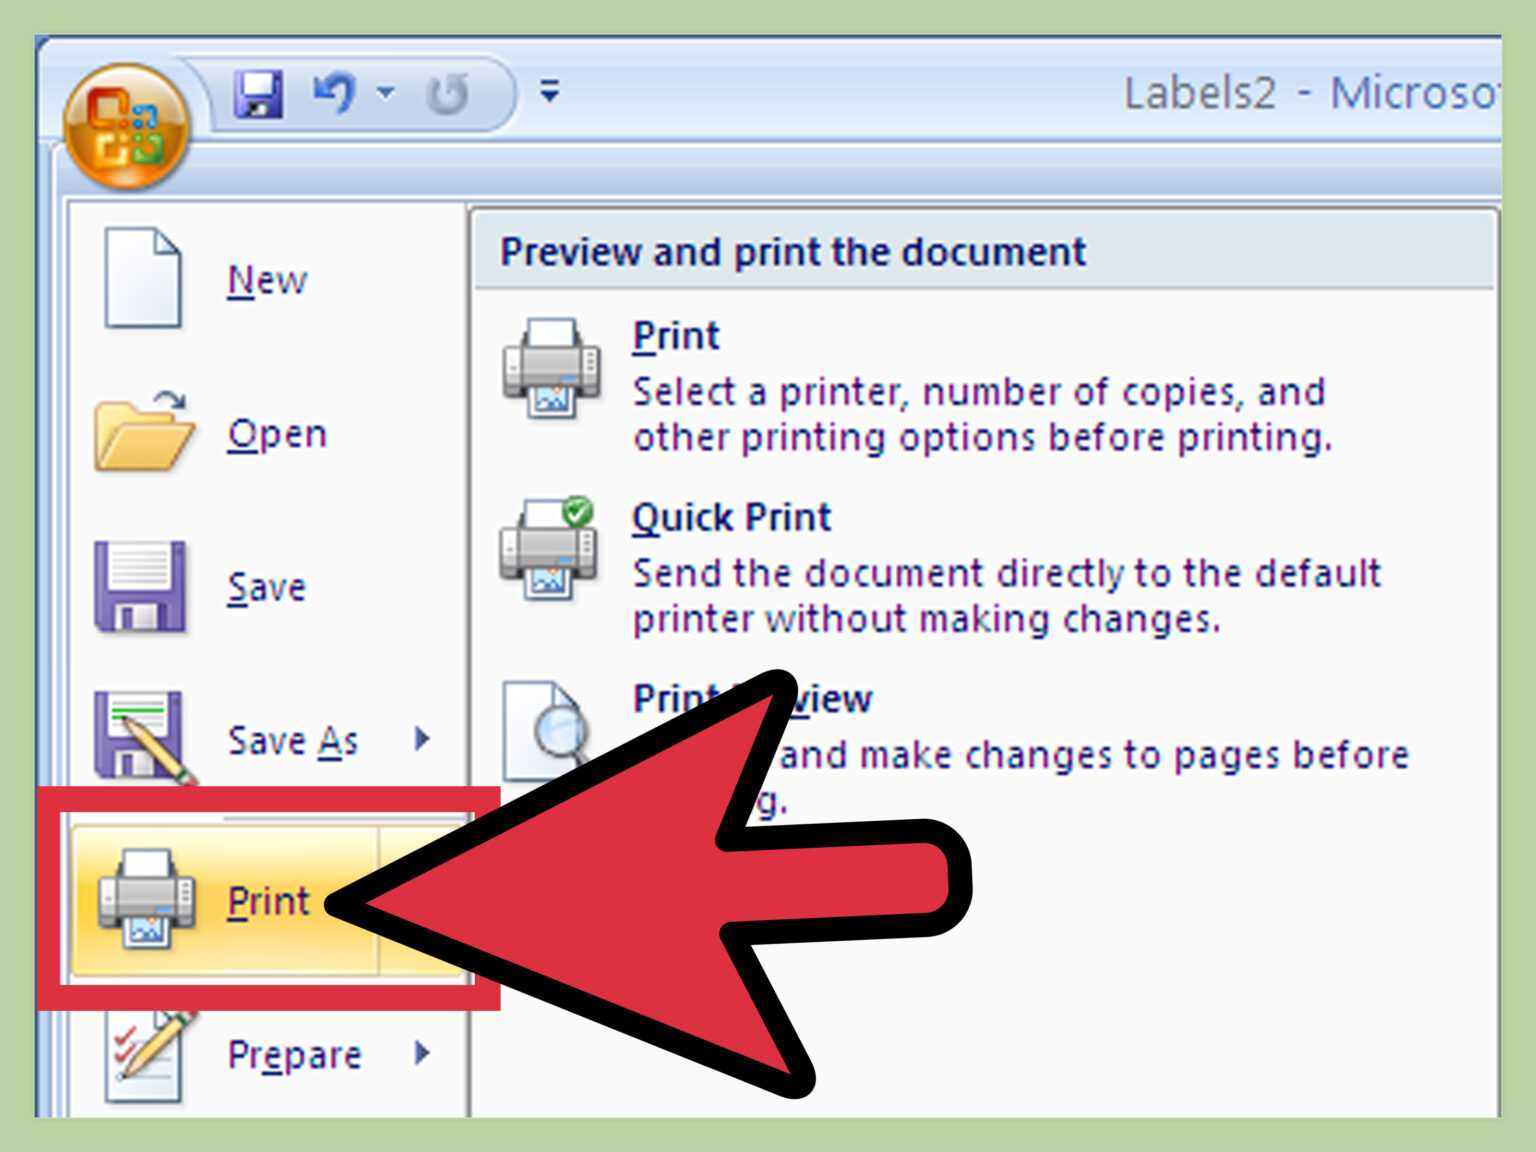 how-to-create-labels-using-microsoft-word-2007-13-steps-in-microsoft